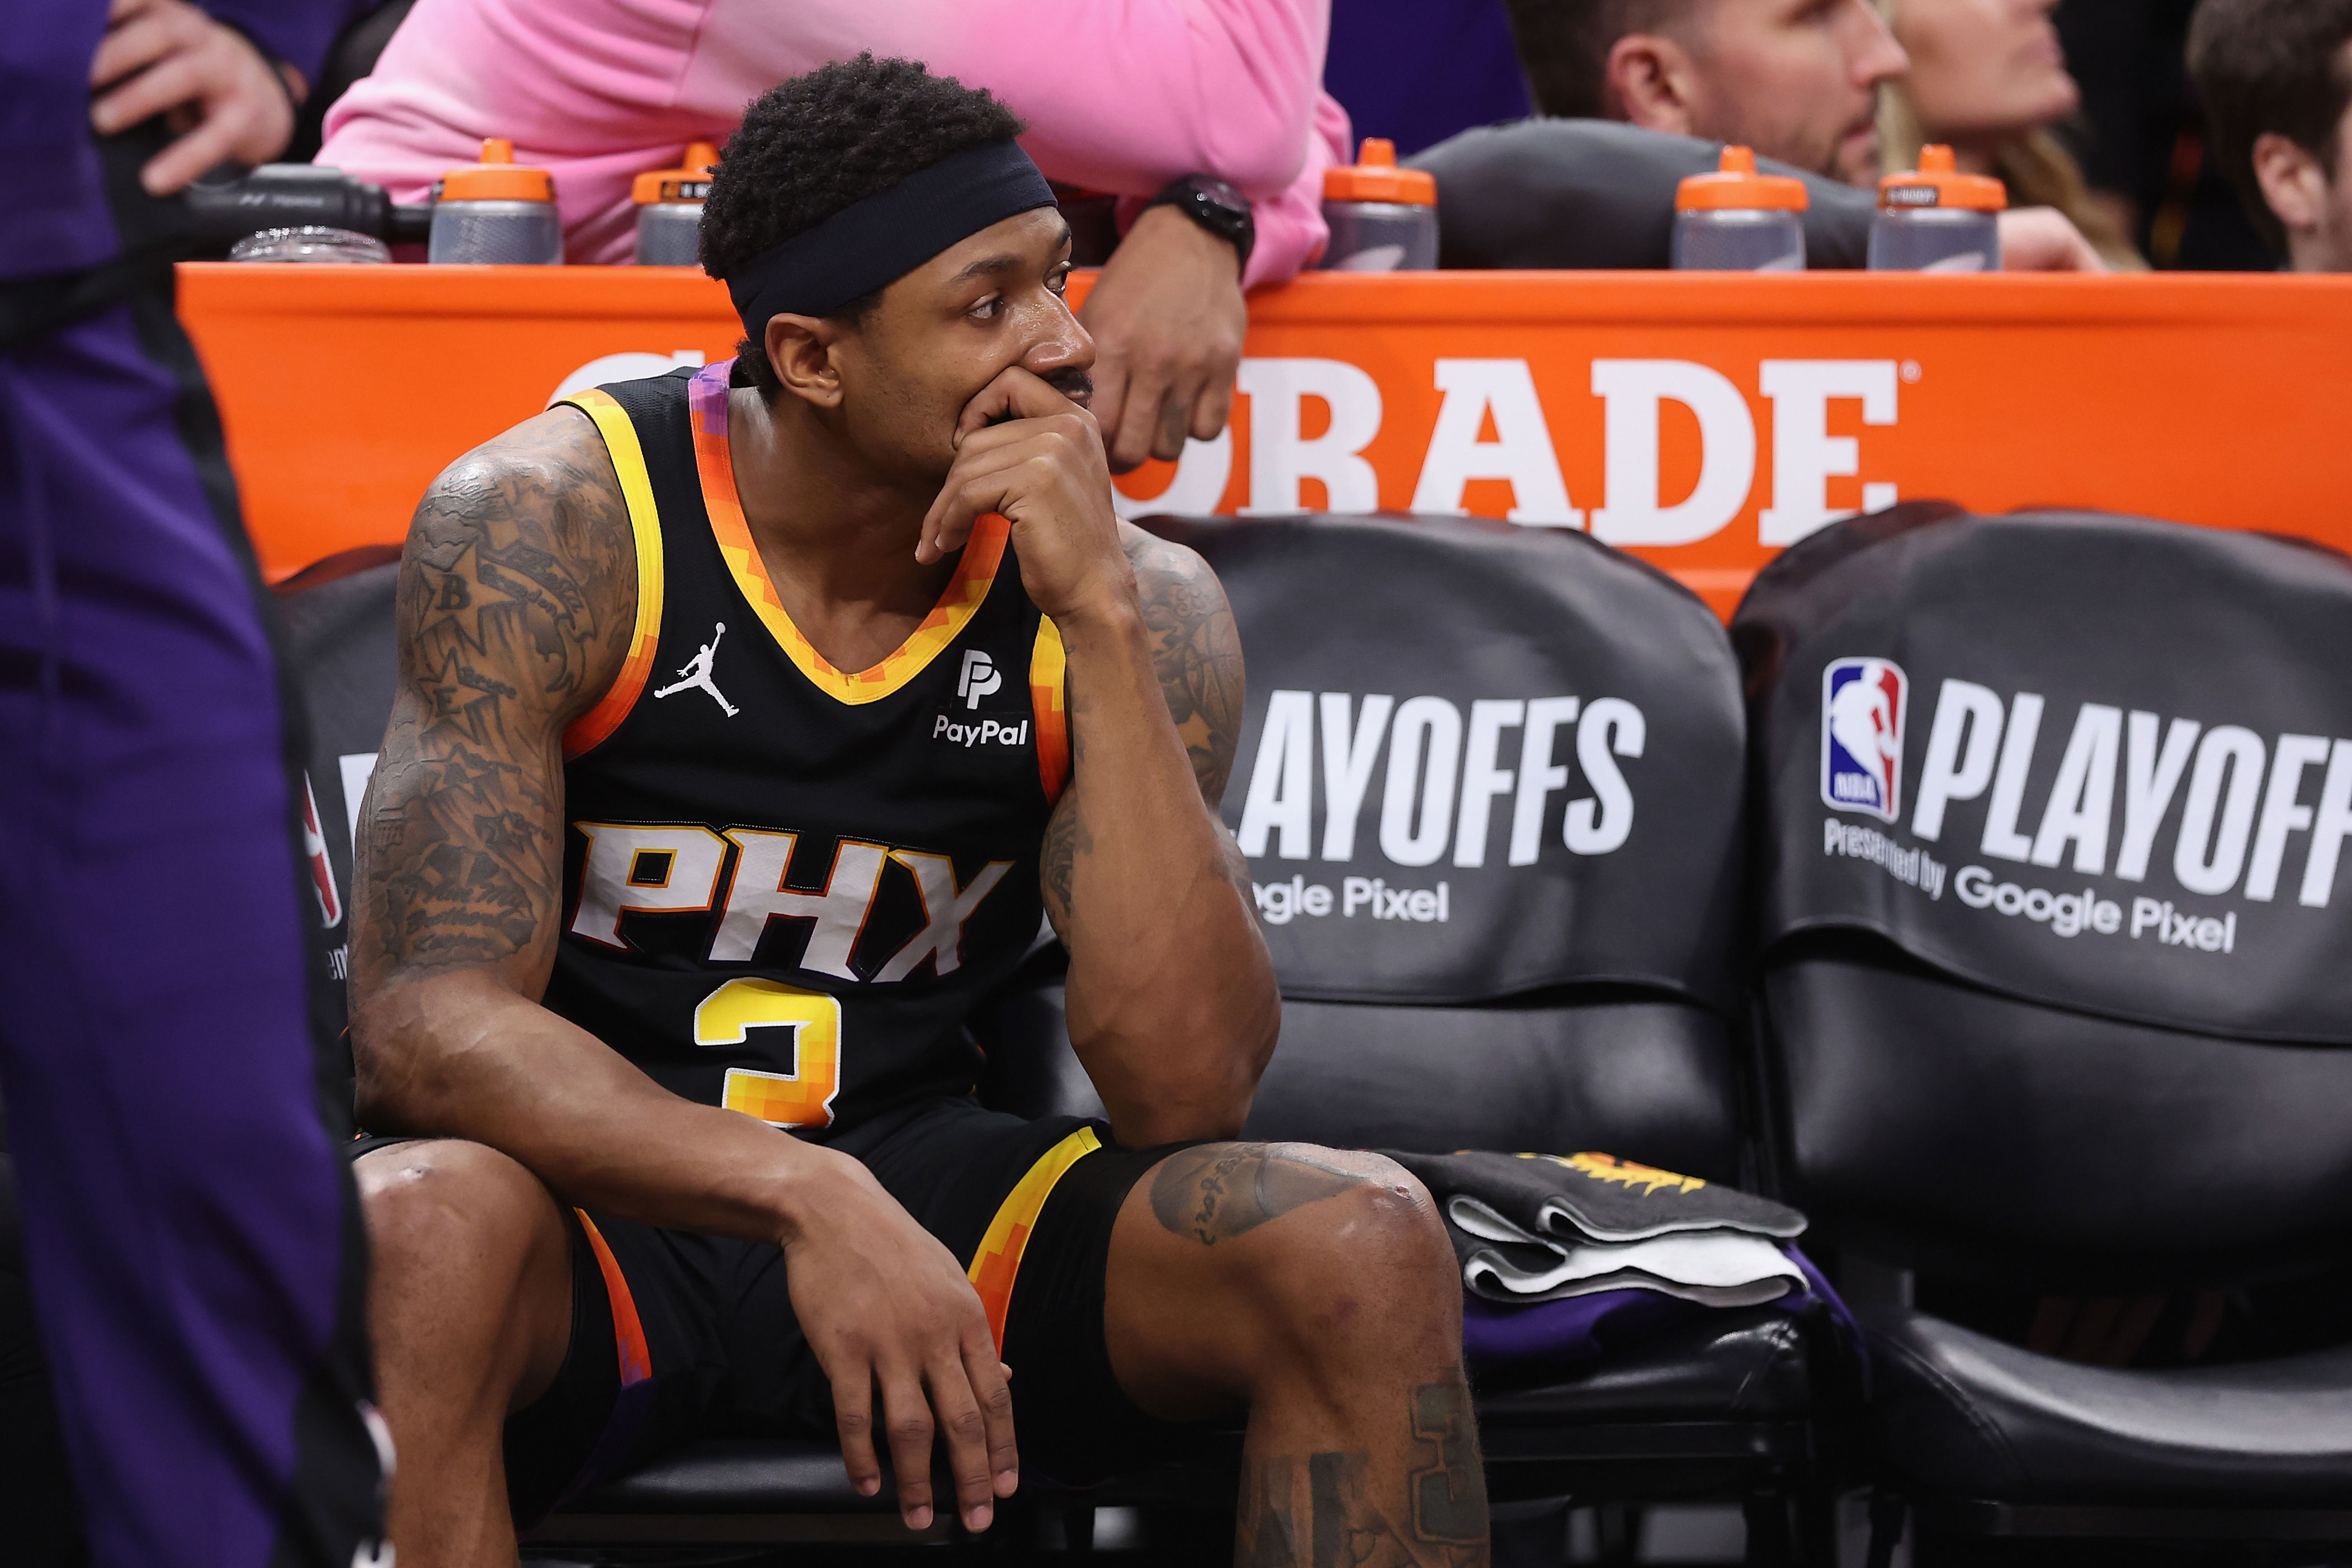 the suns bet the house on bradley beal. it backfired spectacularly.